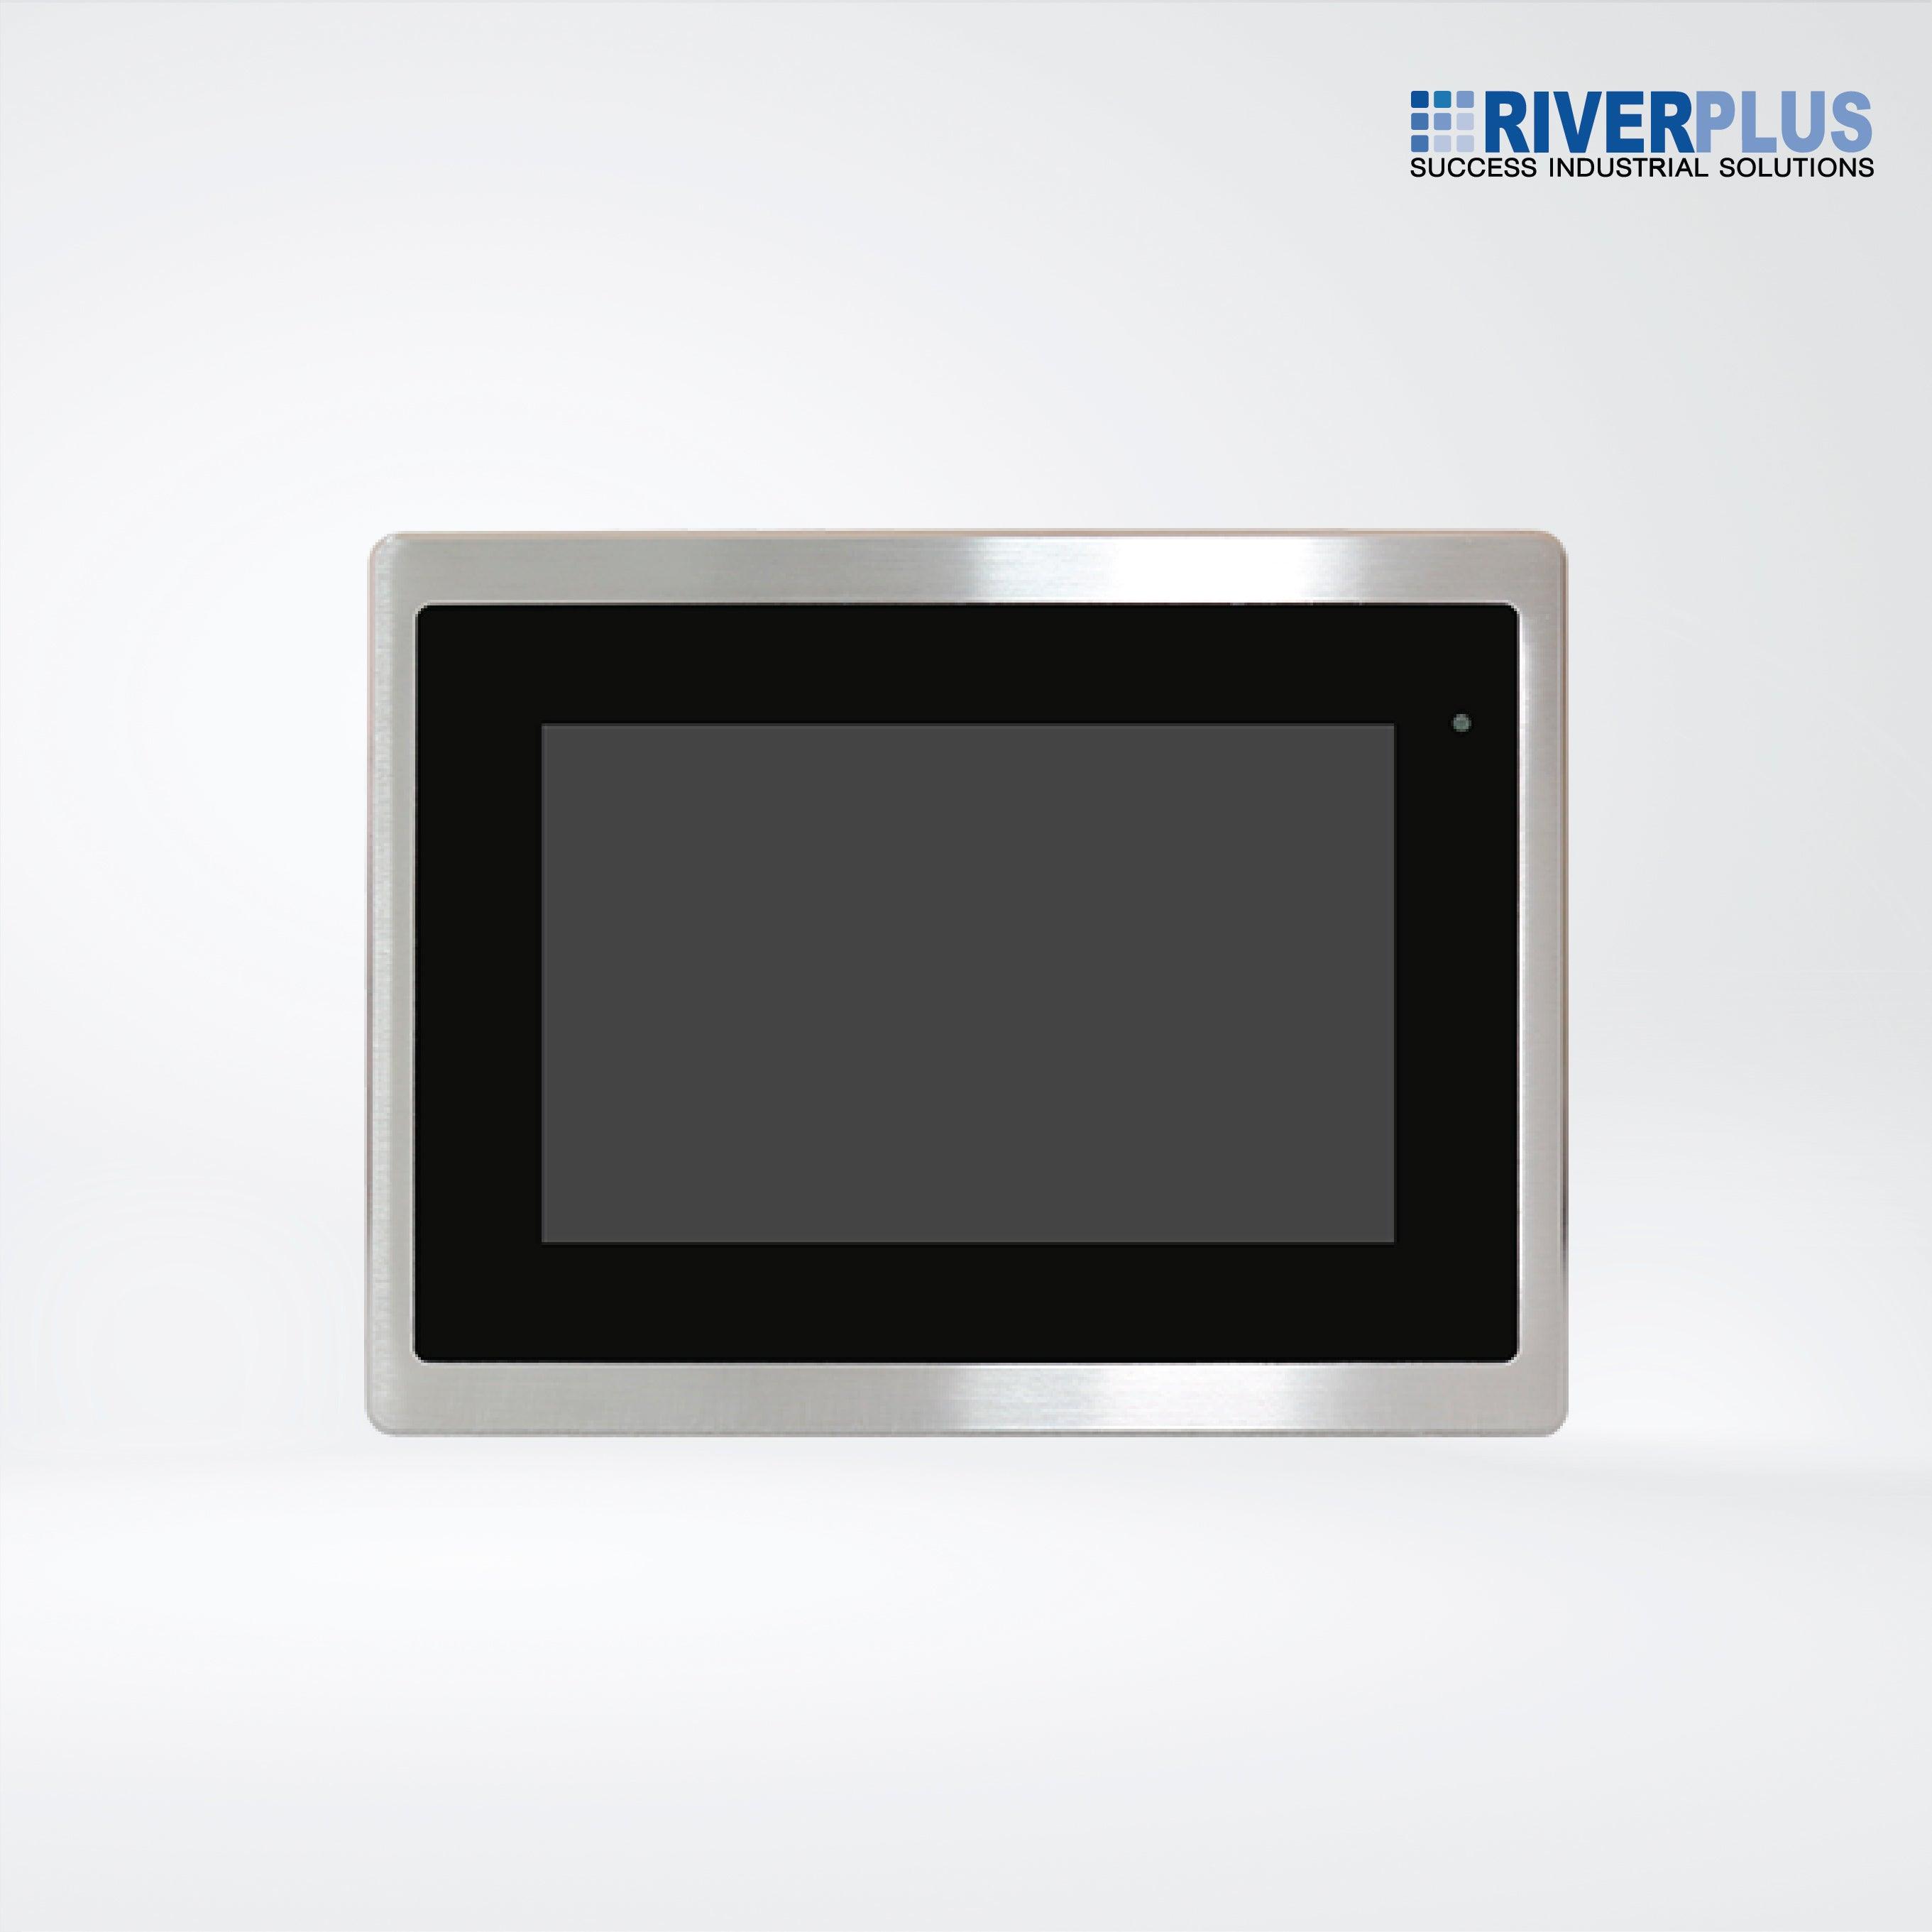 FABS-107P 7” Flat Front Panel IP66 Stainless Chassis Display - Riverplus